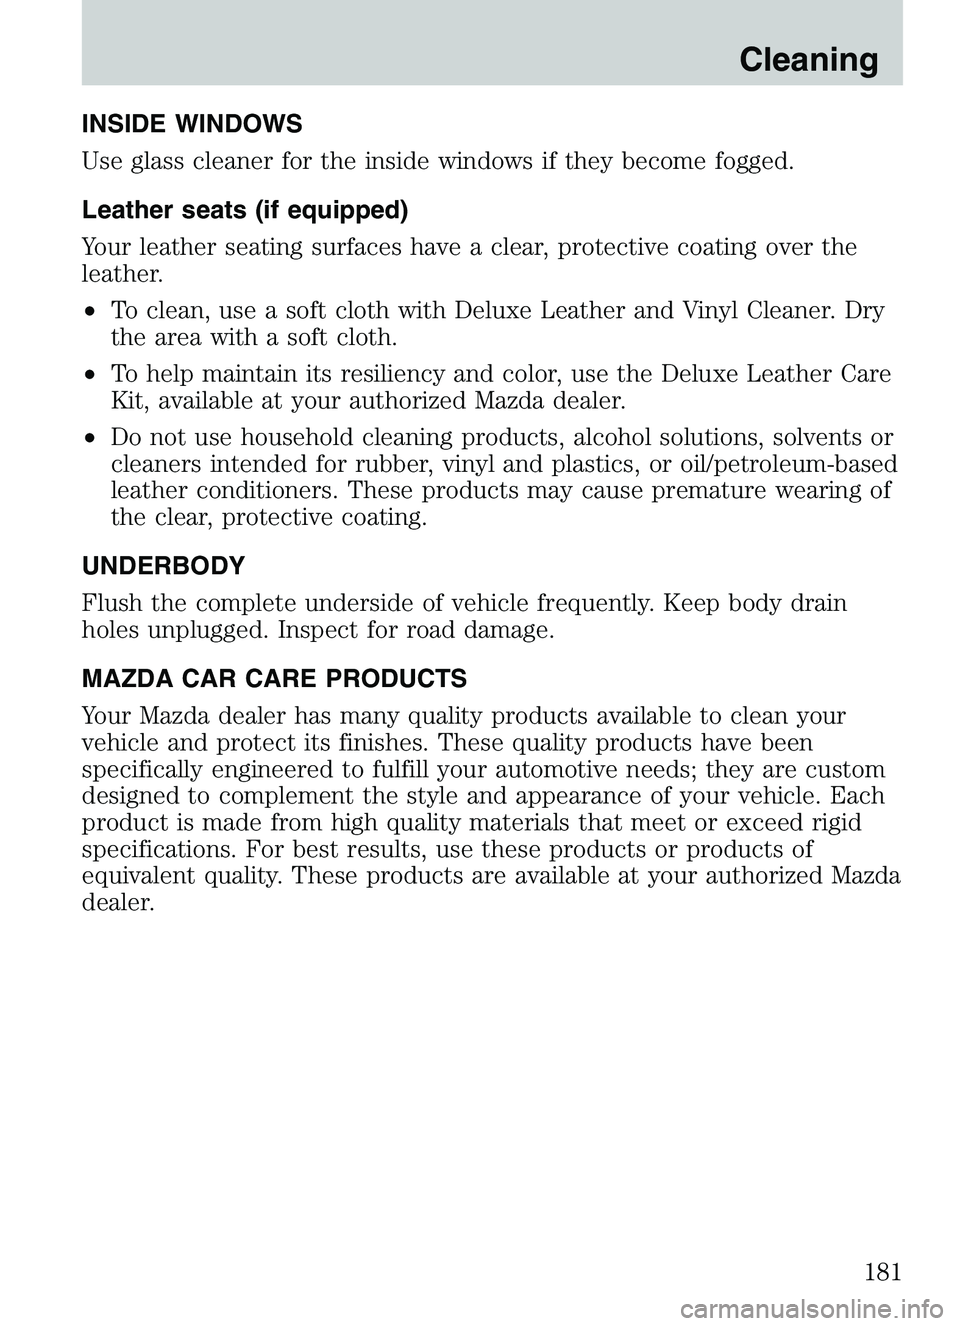 MAZDA MODEL B4000 4WD 2003  Owners Manual INSIDE WINDOWS
Use glass cleaner for the inside windows if they become fogged.
Leather seats (if equipped)
Your leather seating surfaces have a clear, protective coating over the
leather.
•To clean,